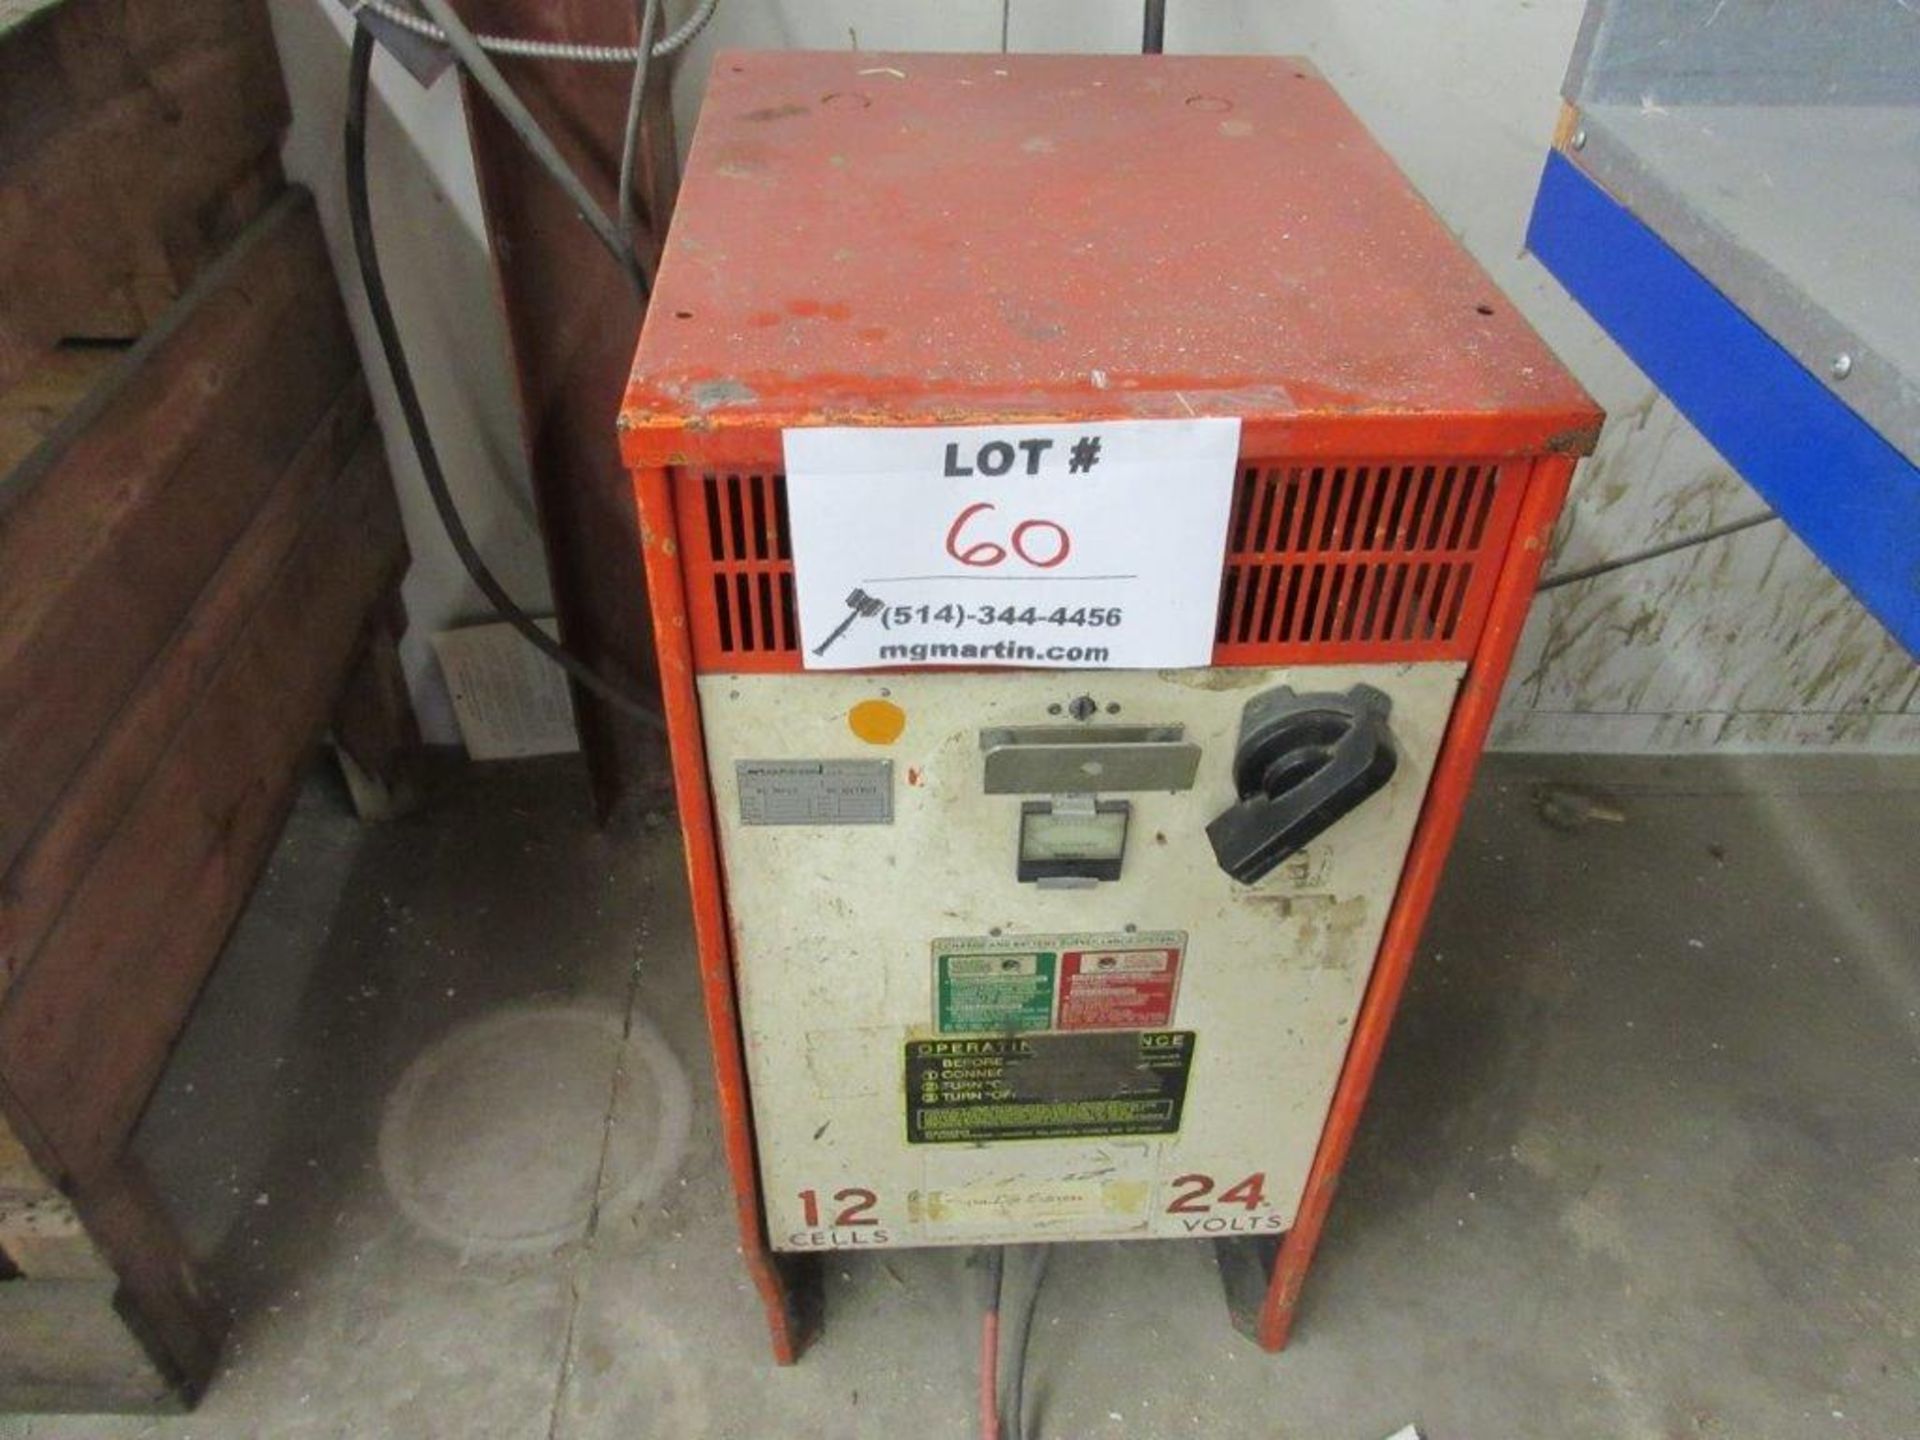 RAYMOND Electric forklift , 24 Volts, Cap 3,000.00 lbs, Mod: 812 w/t charger - Image 6 of 6